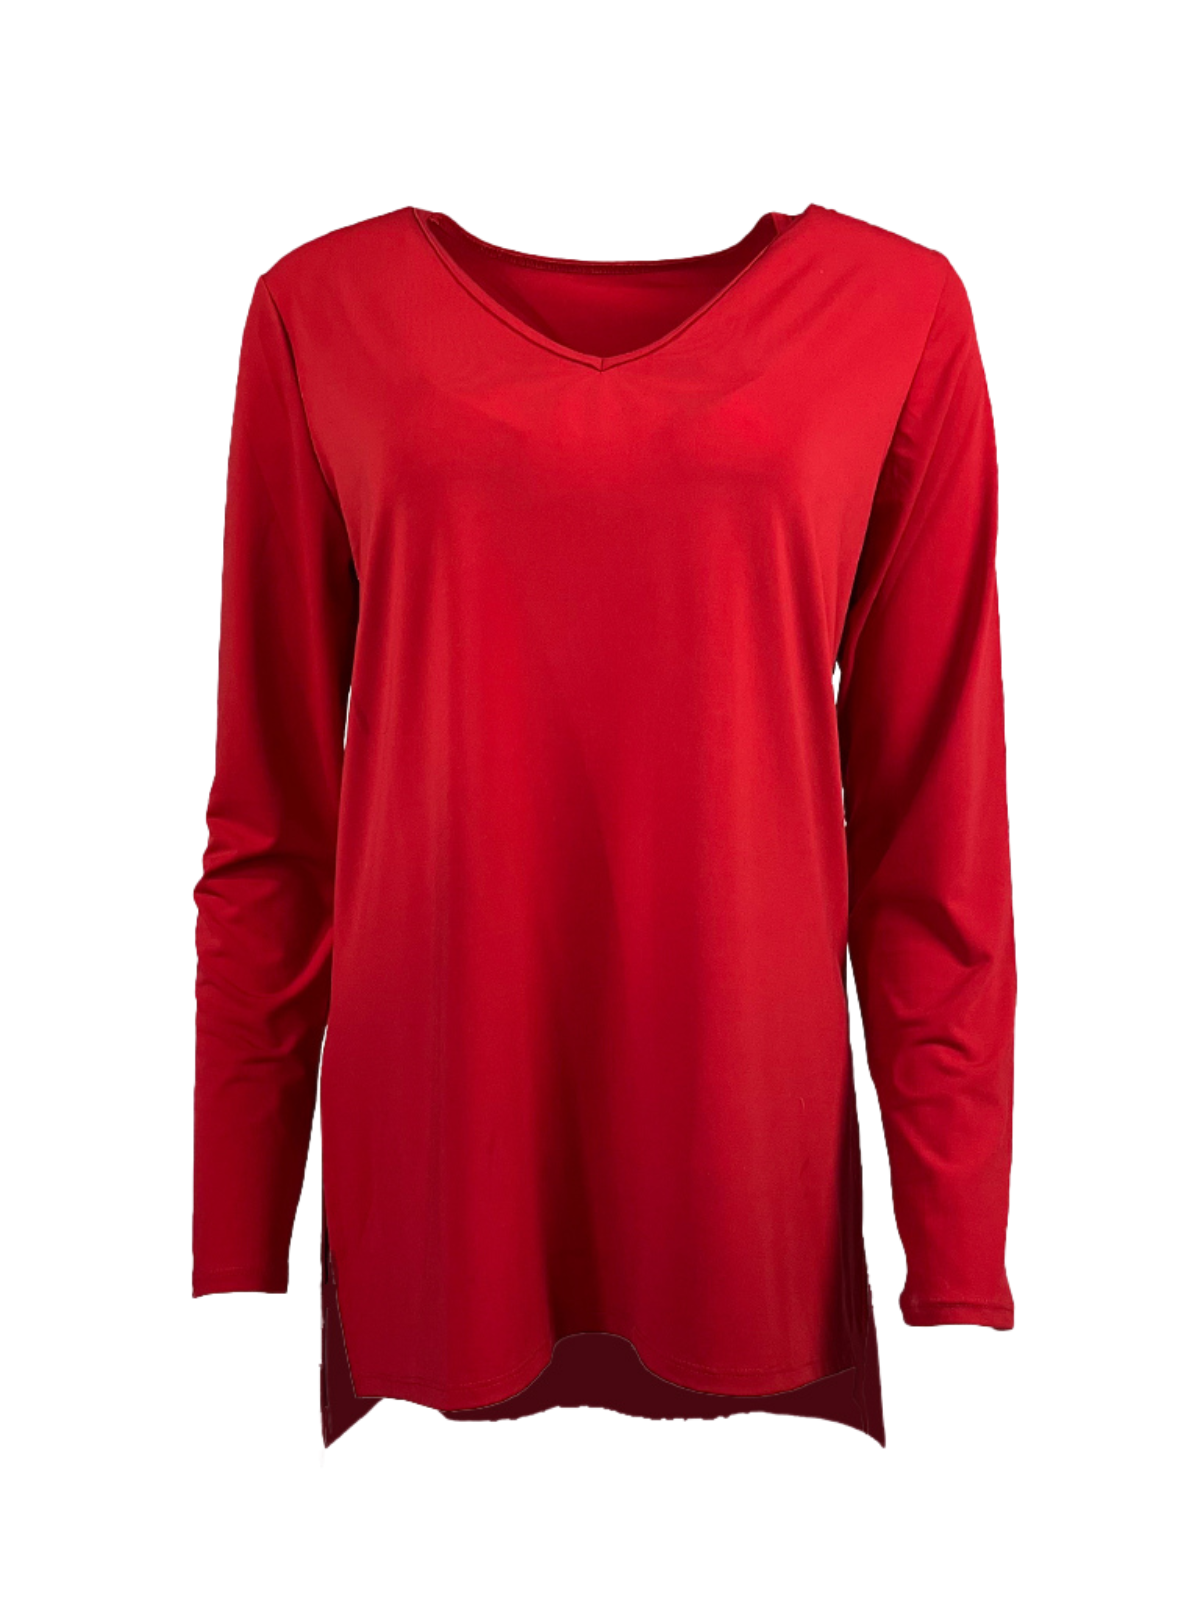 HiLo Tunic · Red